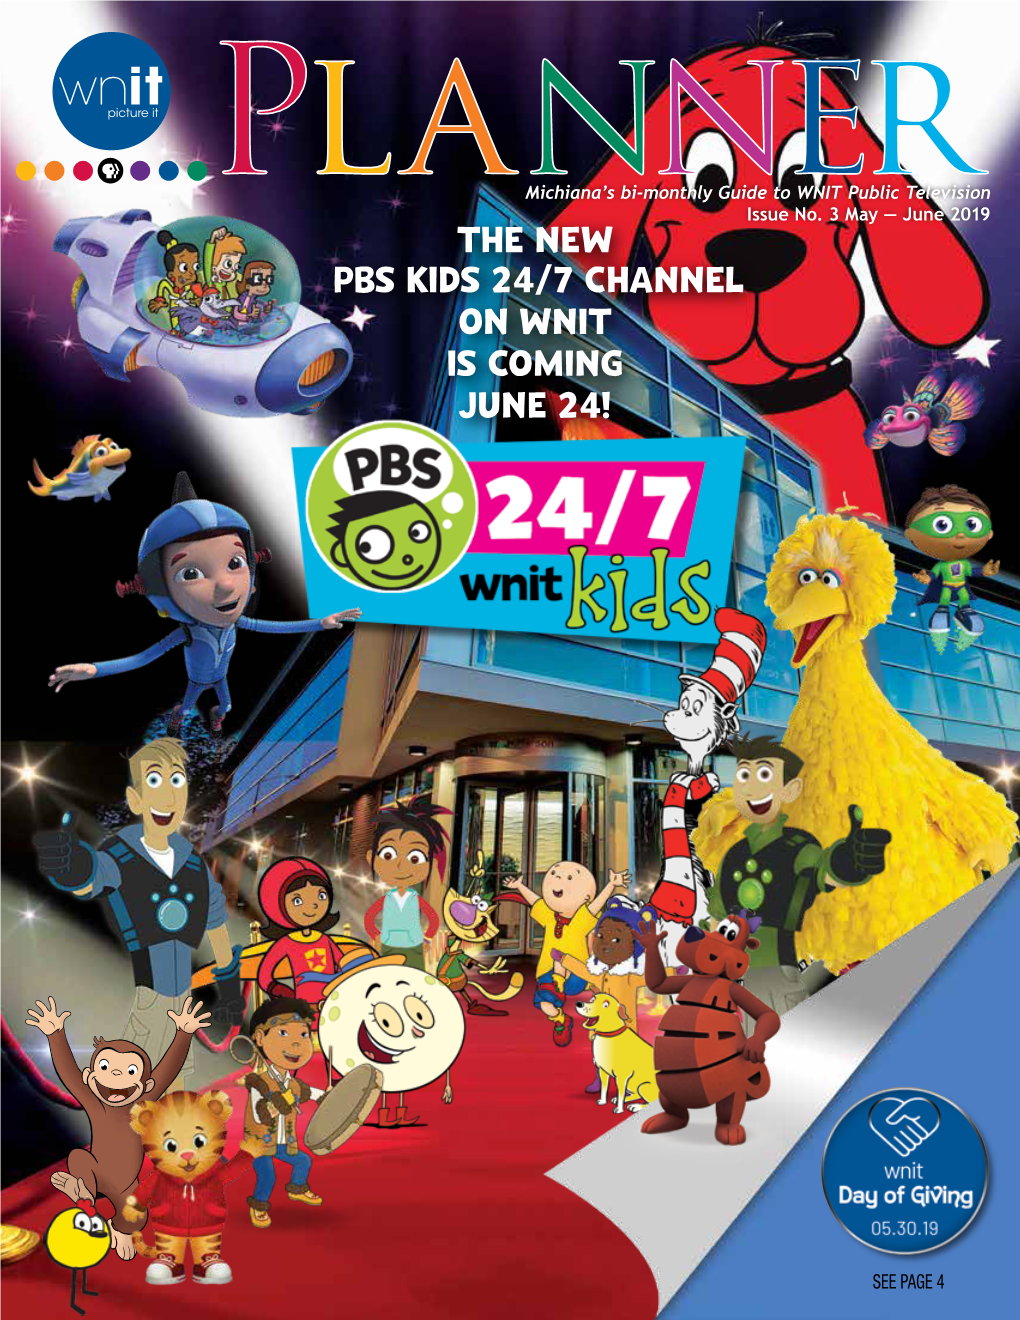 The New Pbs Kids 24/7 Channel on Wnit Is Coming June 24!